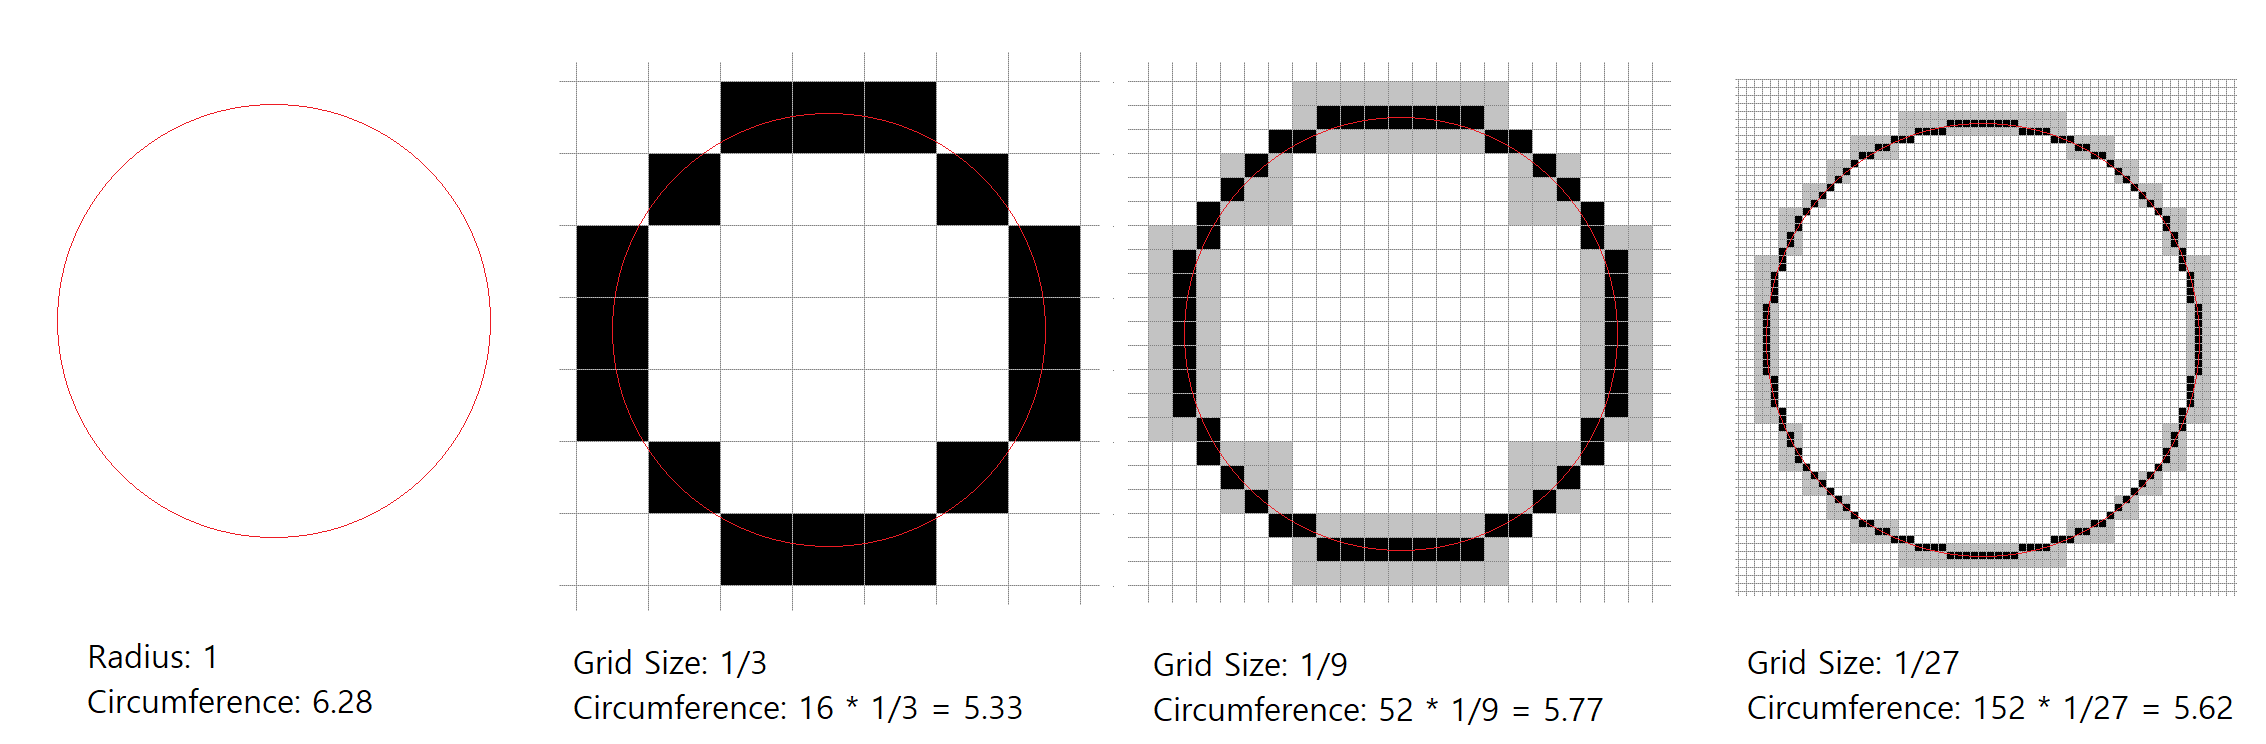 Approximating a circle with pixels in a grid (own work, CC BY-SA)